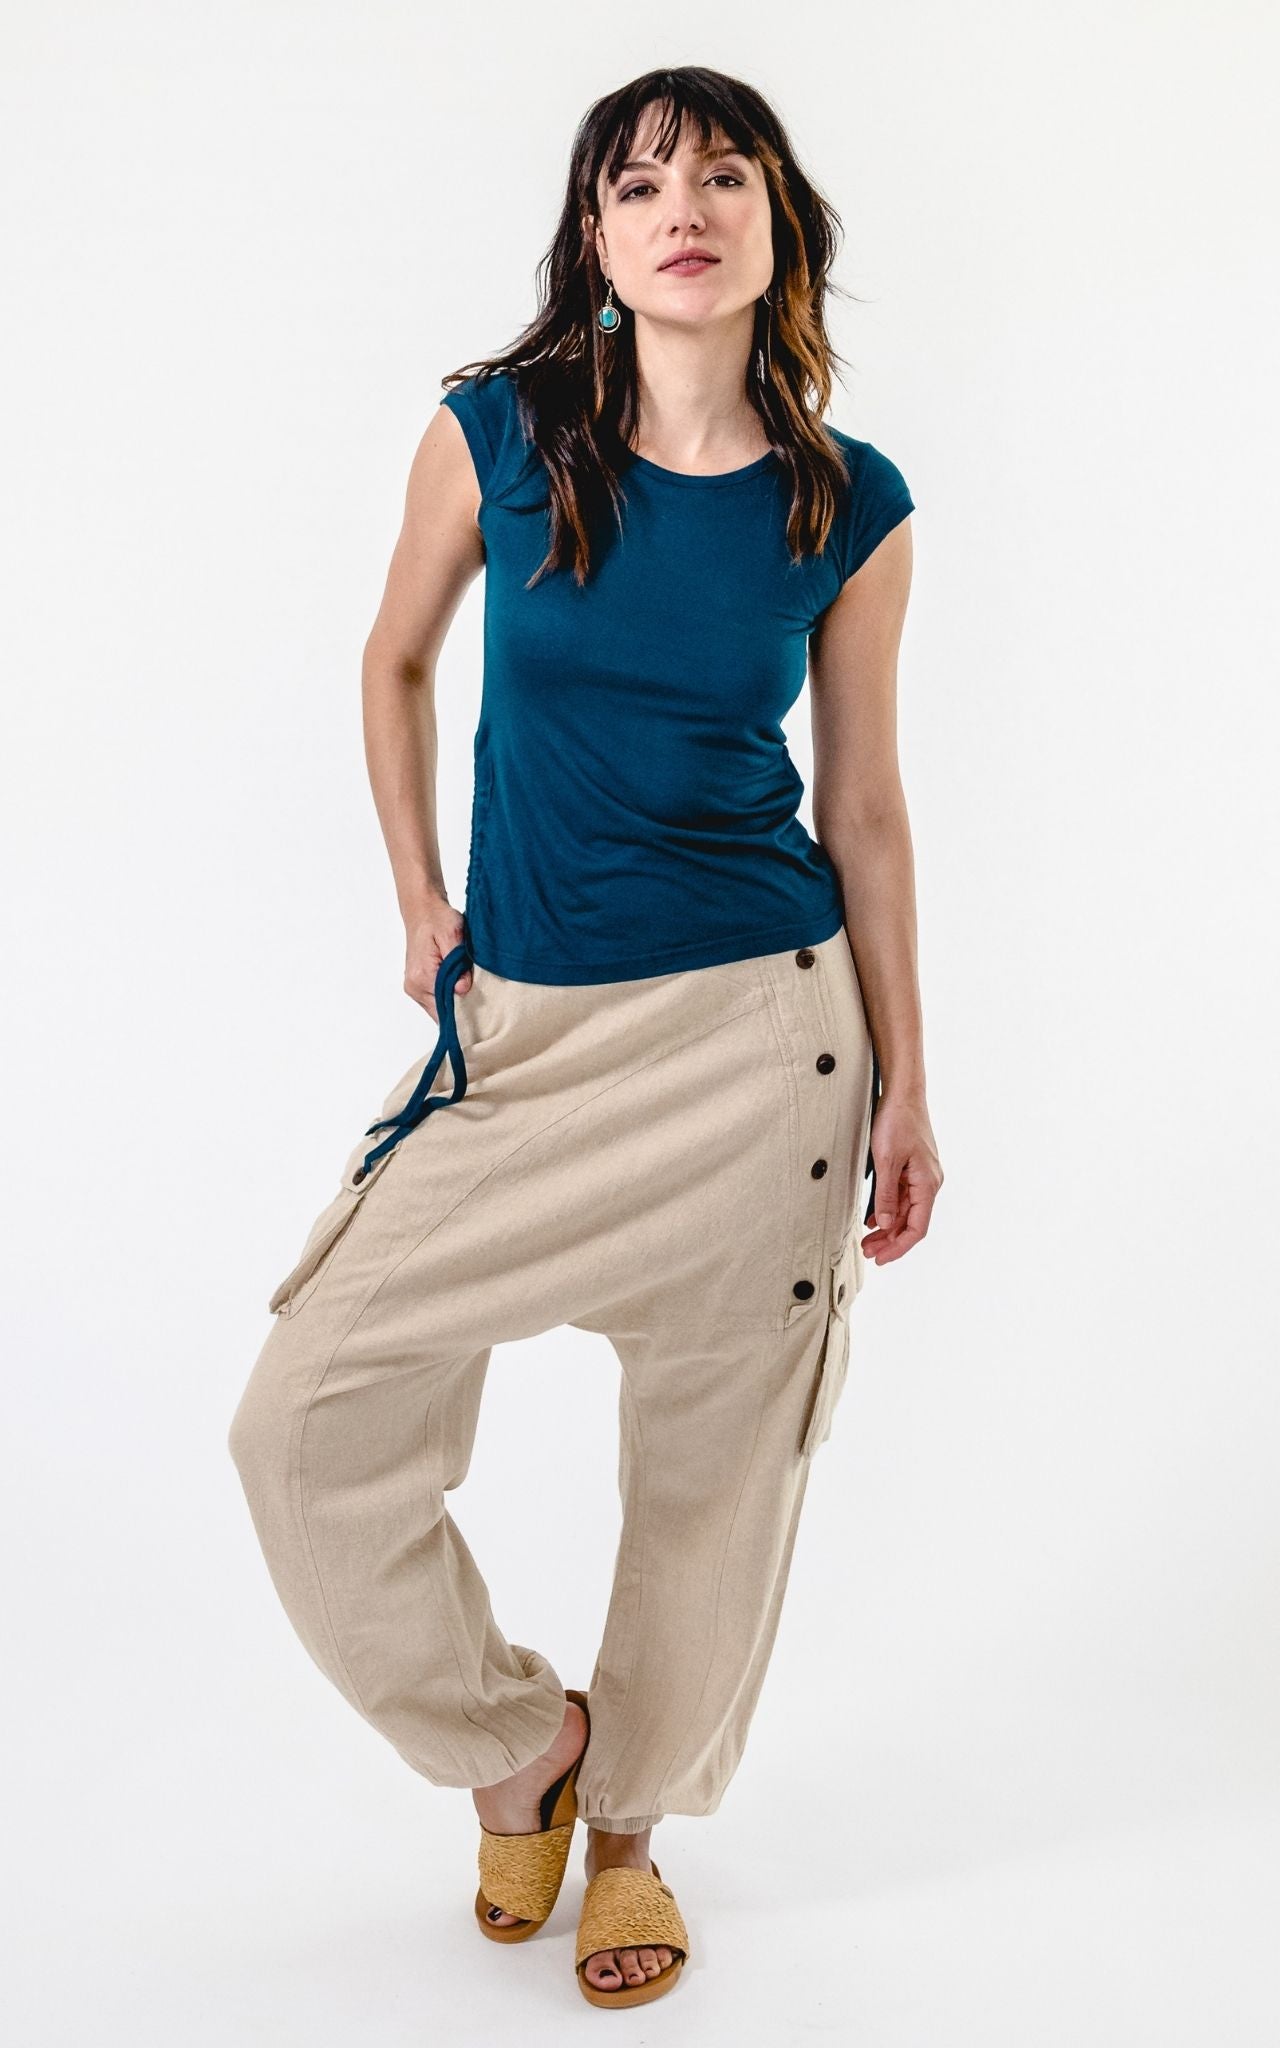 Surya Australia Ethical Drop Crotch Pants Made in Nepal - Natural